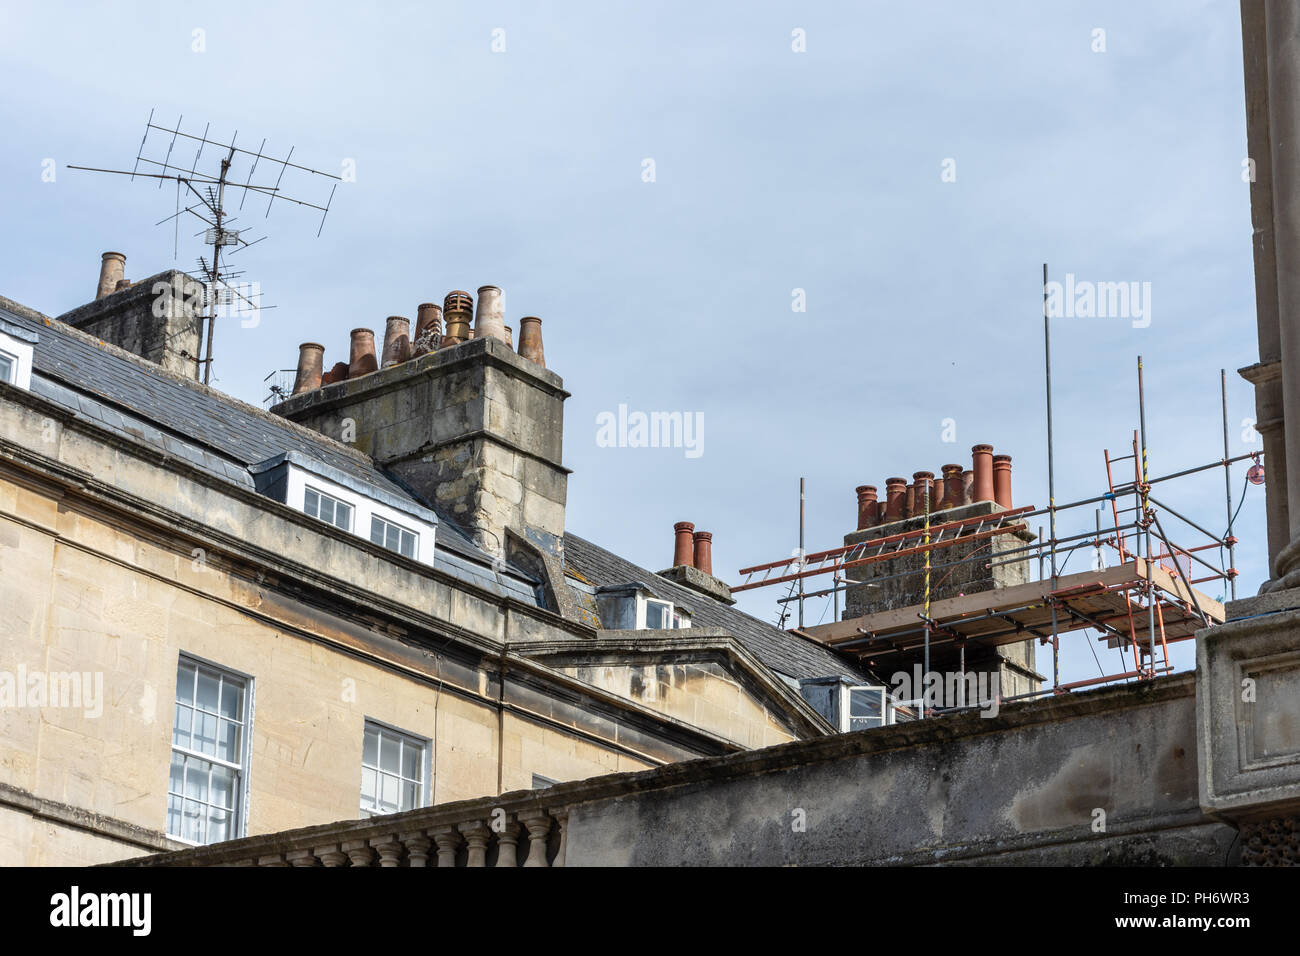 A rooftop in the city of Bath with TV ariels and scaffolding around a chimney stack with multiple chimney pots Stock Photo